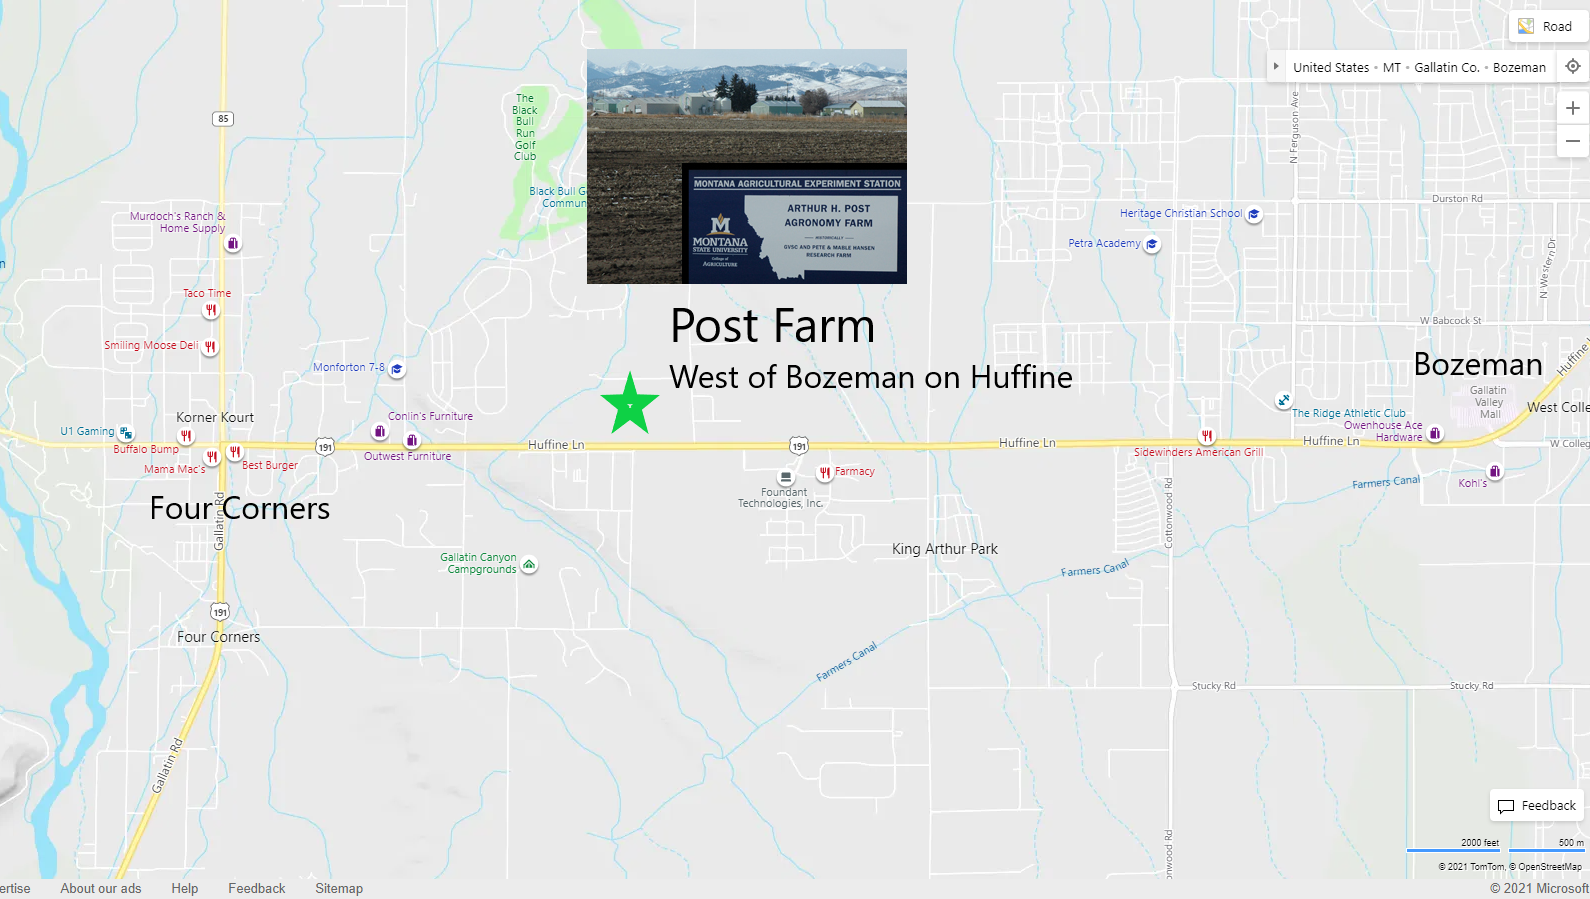 Map to Post Farm - West of Bozeman on Huffine